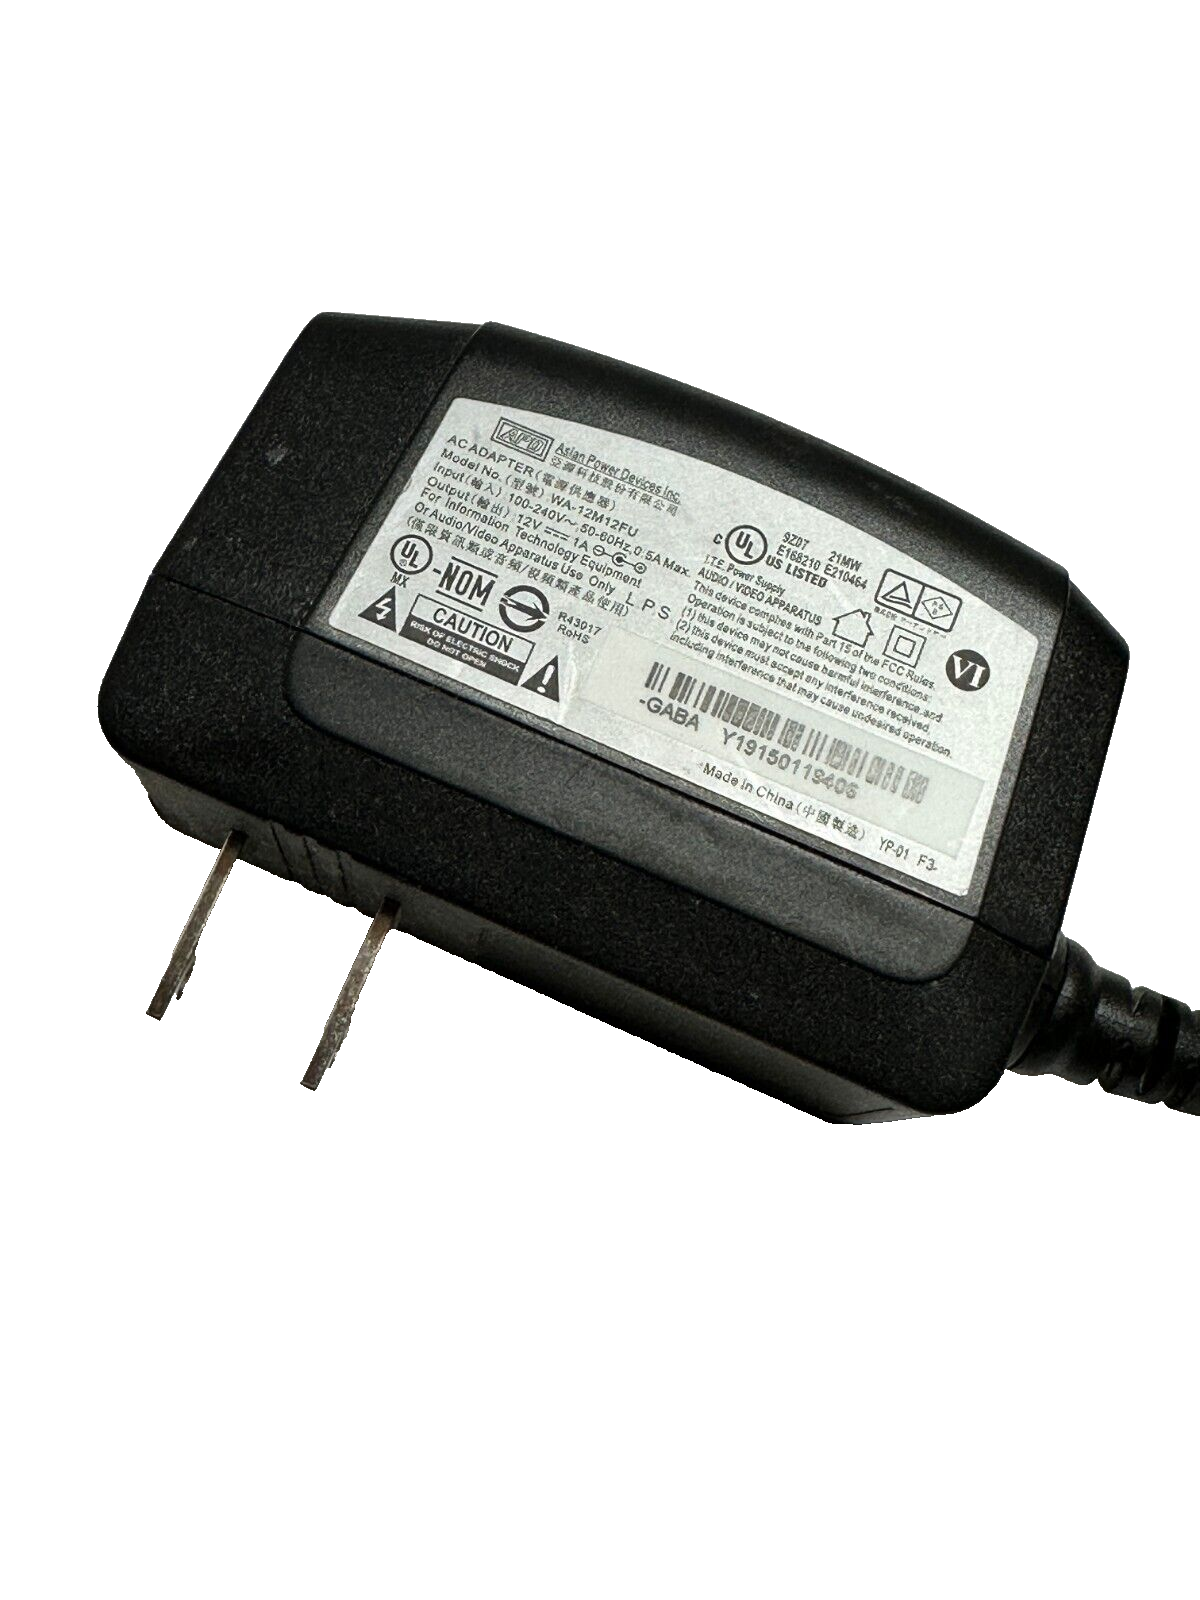 *Brand NEW*APD 12V 1A AC ADAPTER WA-12M12FU for LINKSYS ARRIS LG Blu-Ray Disc Player POWER Supply